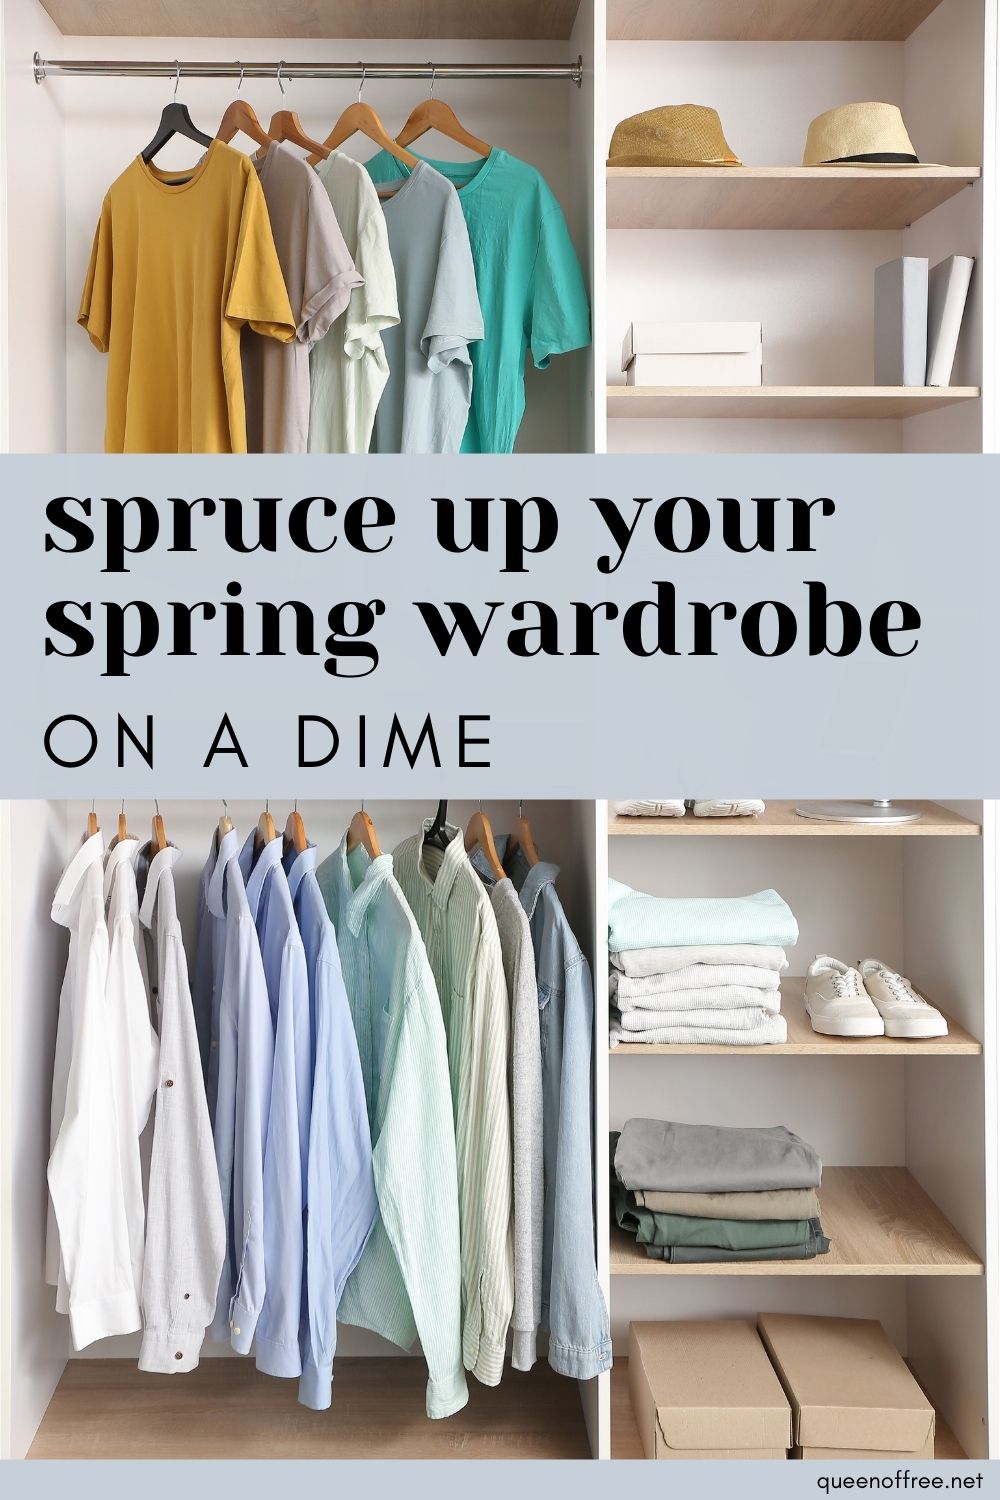 Looking to freshen things up but low on funds? Check out 11 Smart Shopping Strategies for a New Spring Wardrobe for Less Cash.